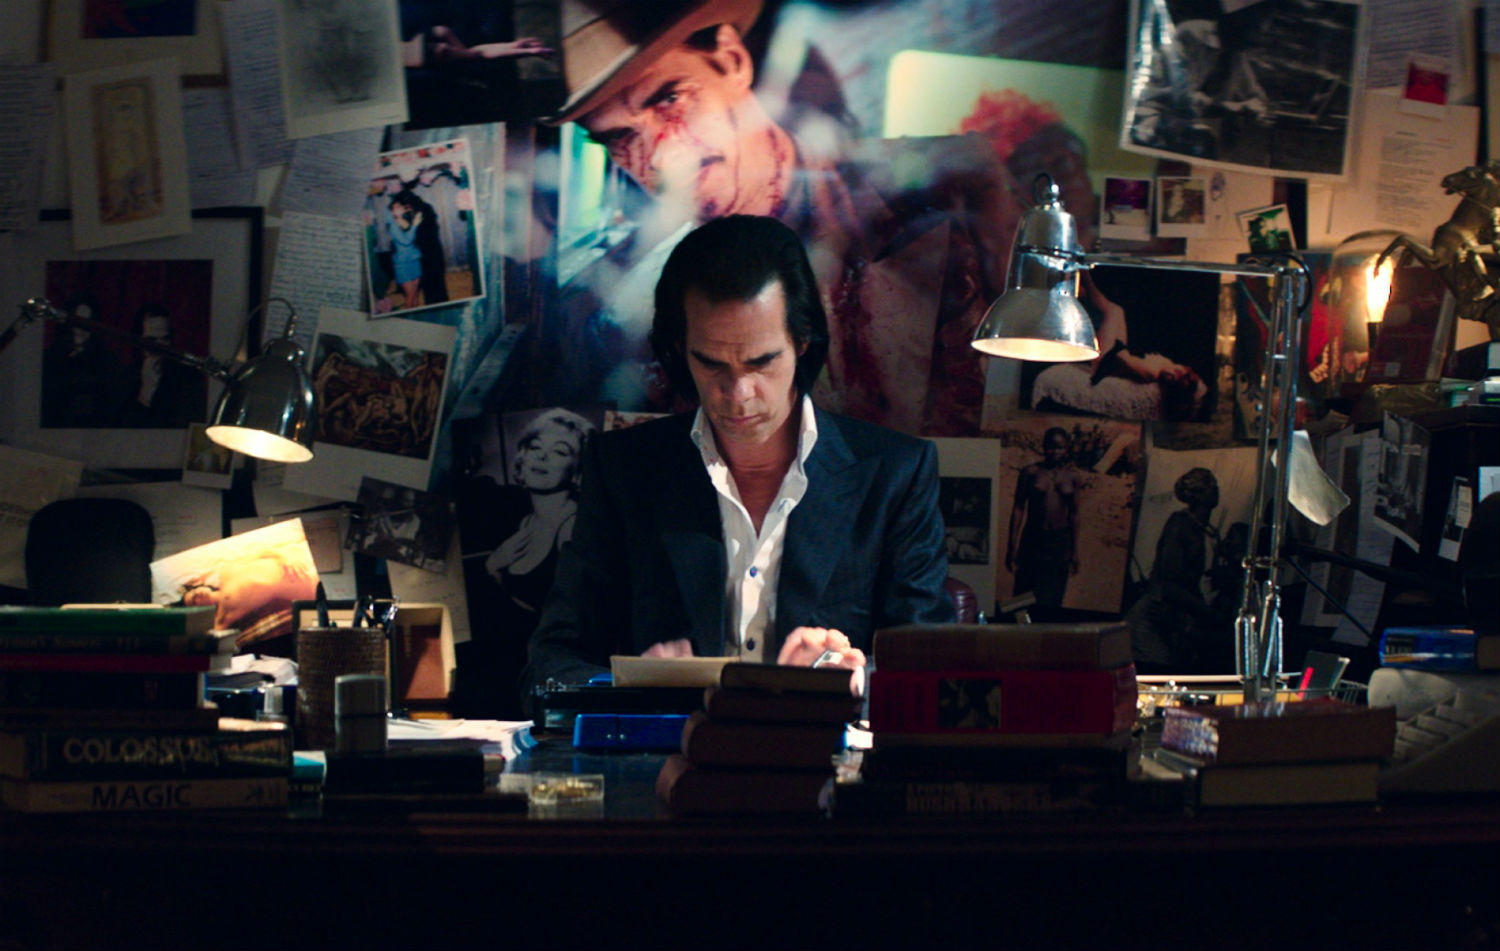 nick cave desk musician 20000 days on earth